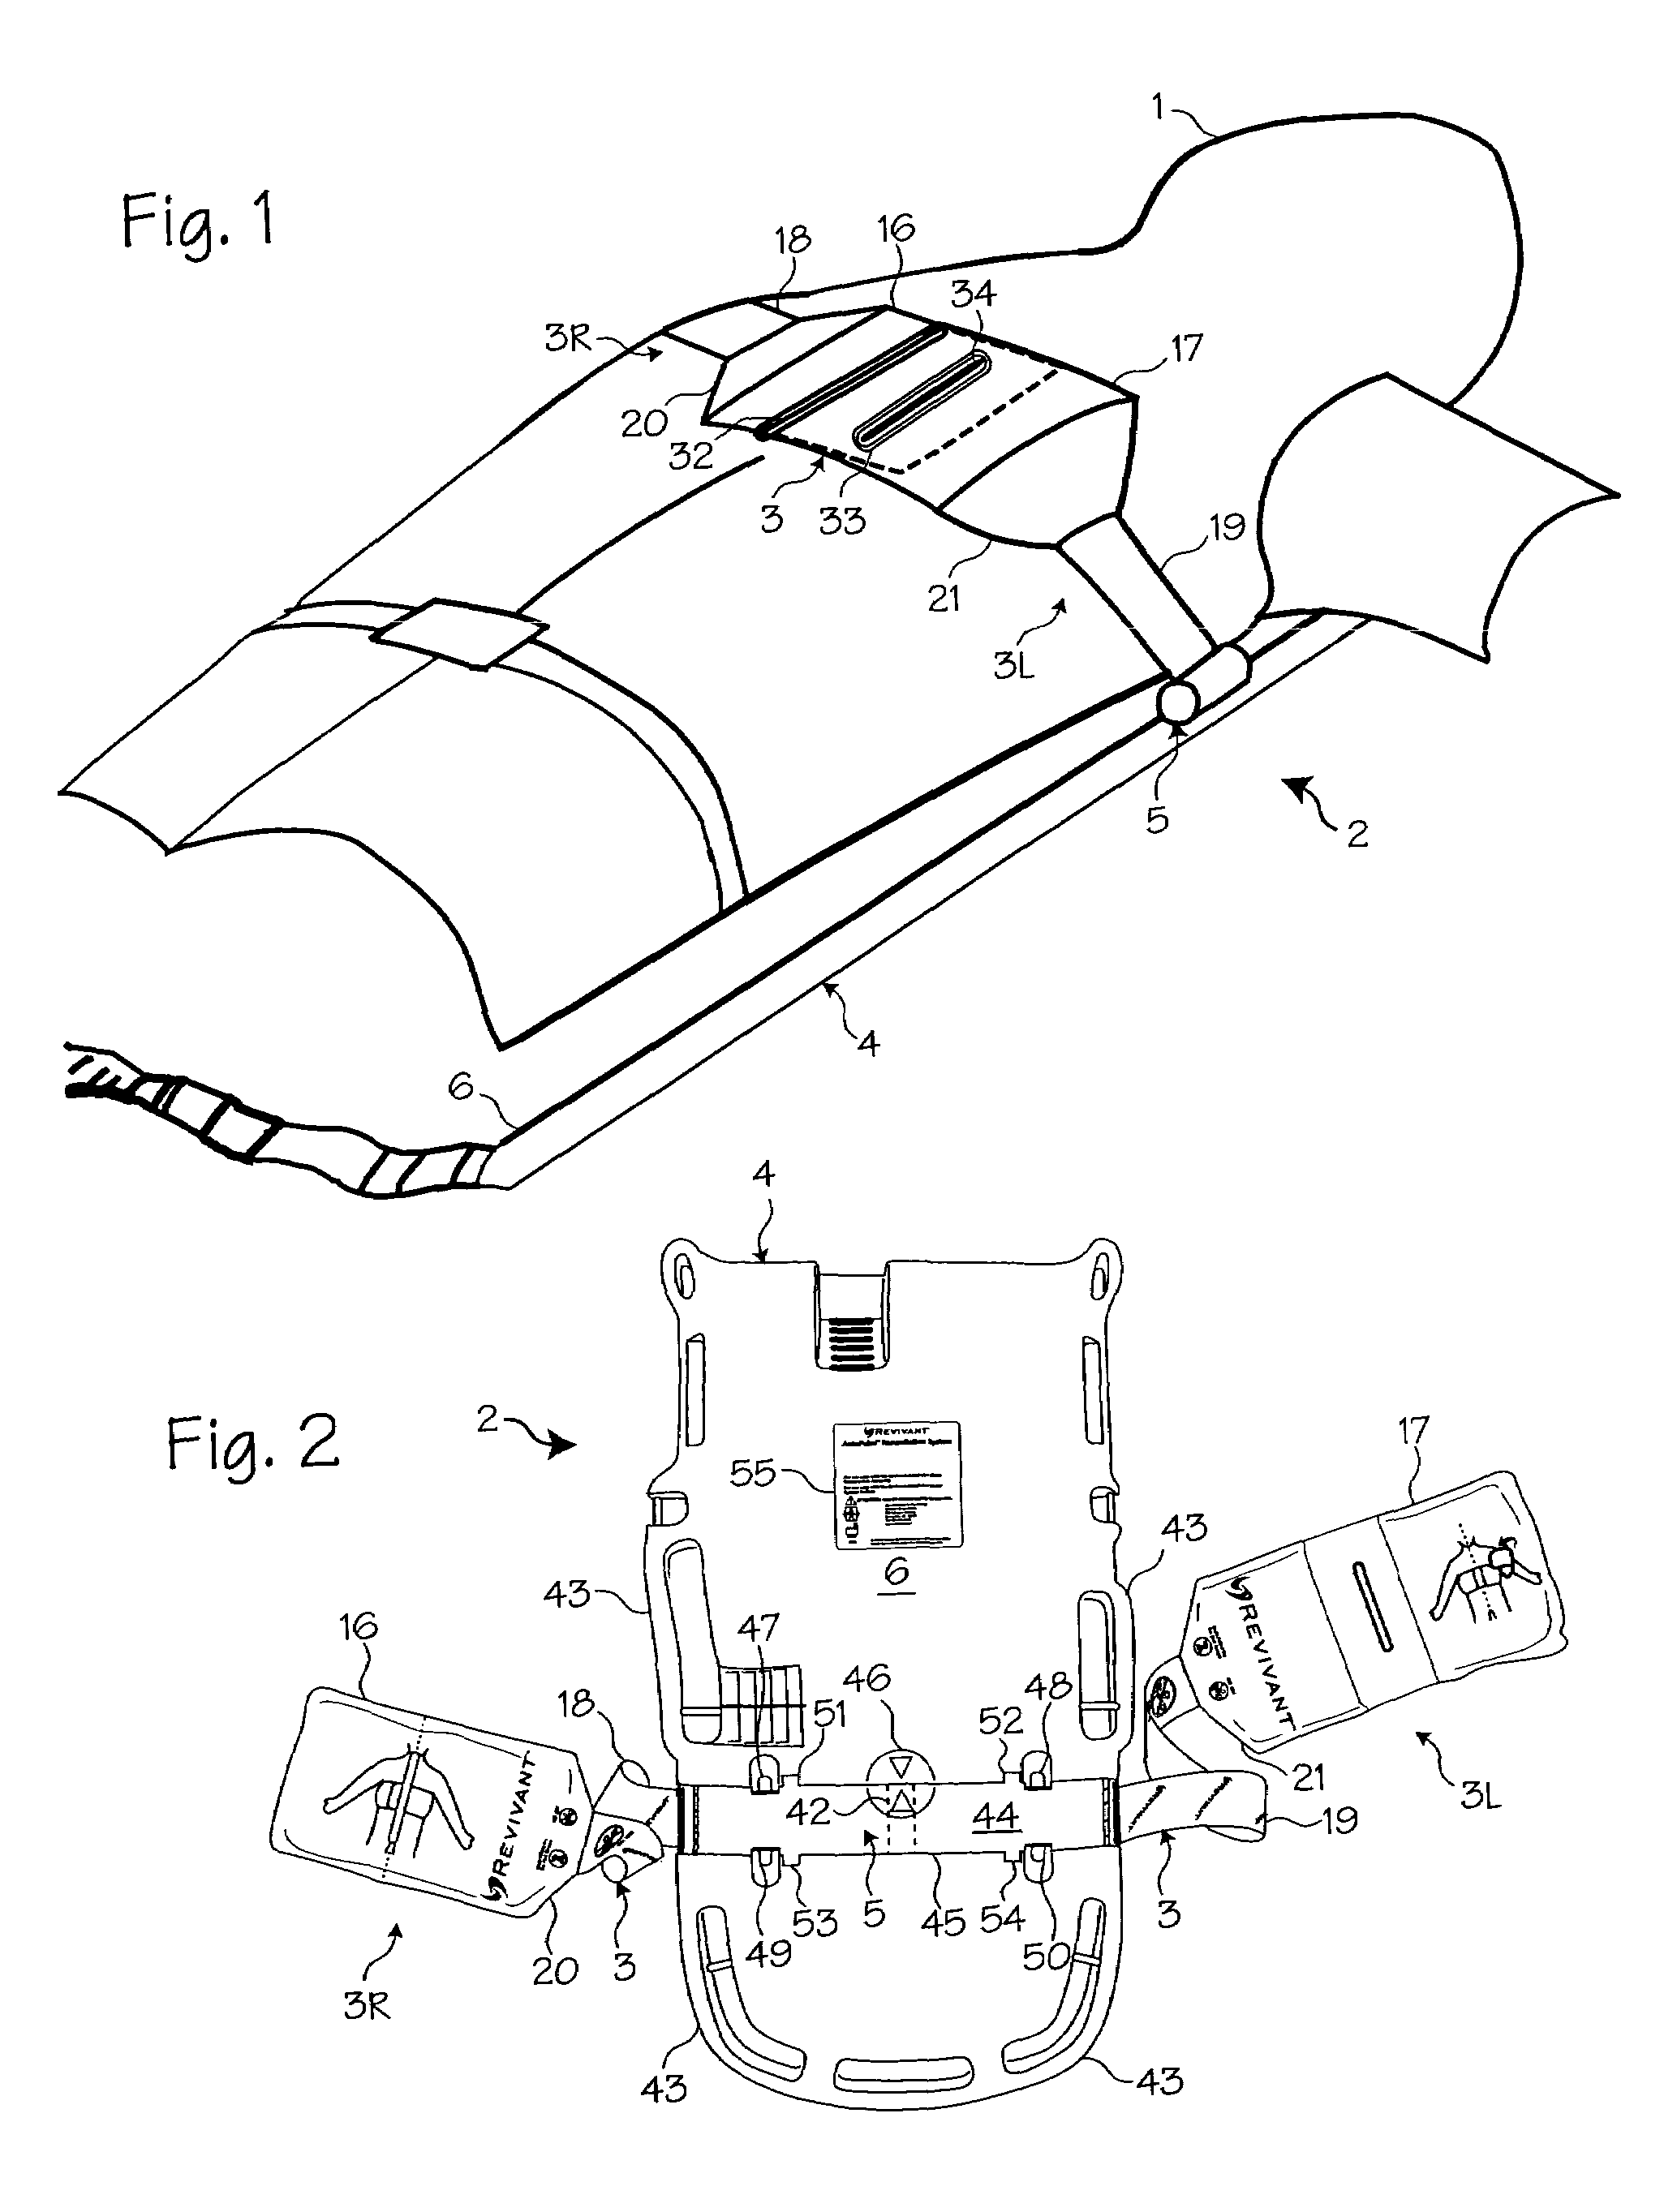 Methods and devices for attaching a belt cartridge to a chest compression device